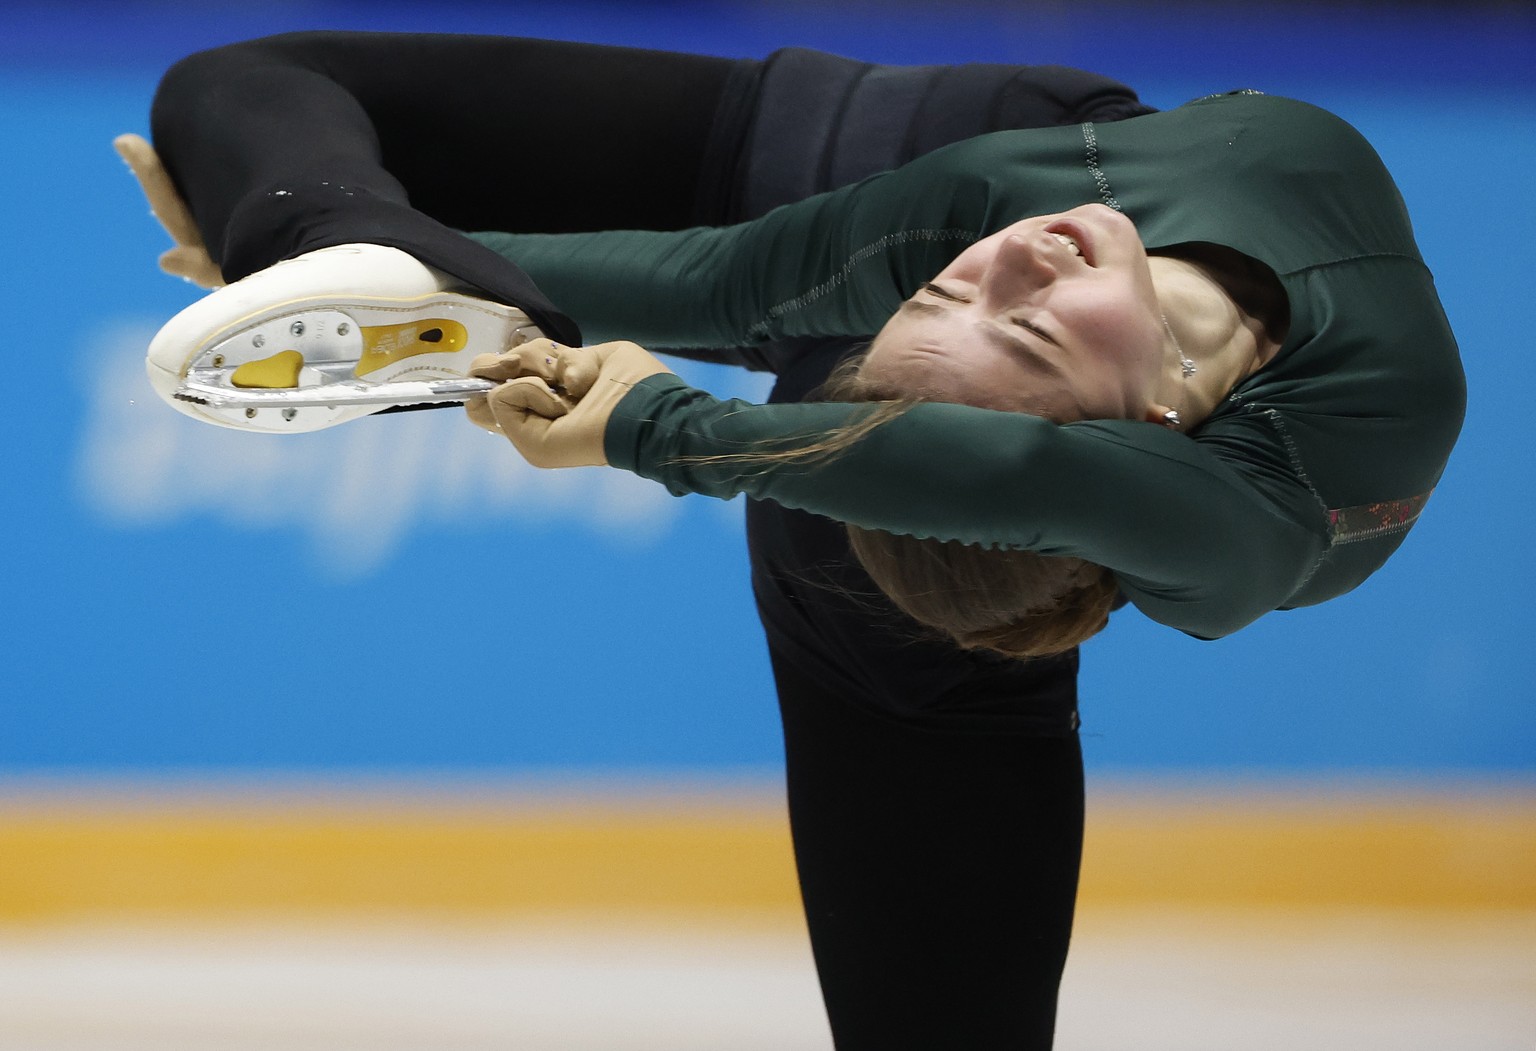 epa09748628 Figure skater Kamila Valieva of the Russian Olympic Committee in action during a practice session at the Beijing 2022 Olympic Games, Beijing, China, 12 February 2022. EPA/HOW HWEE YOUNG